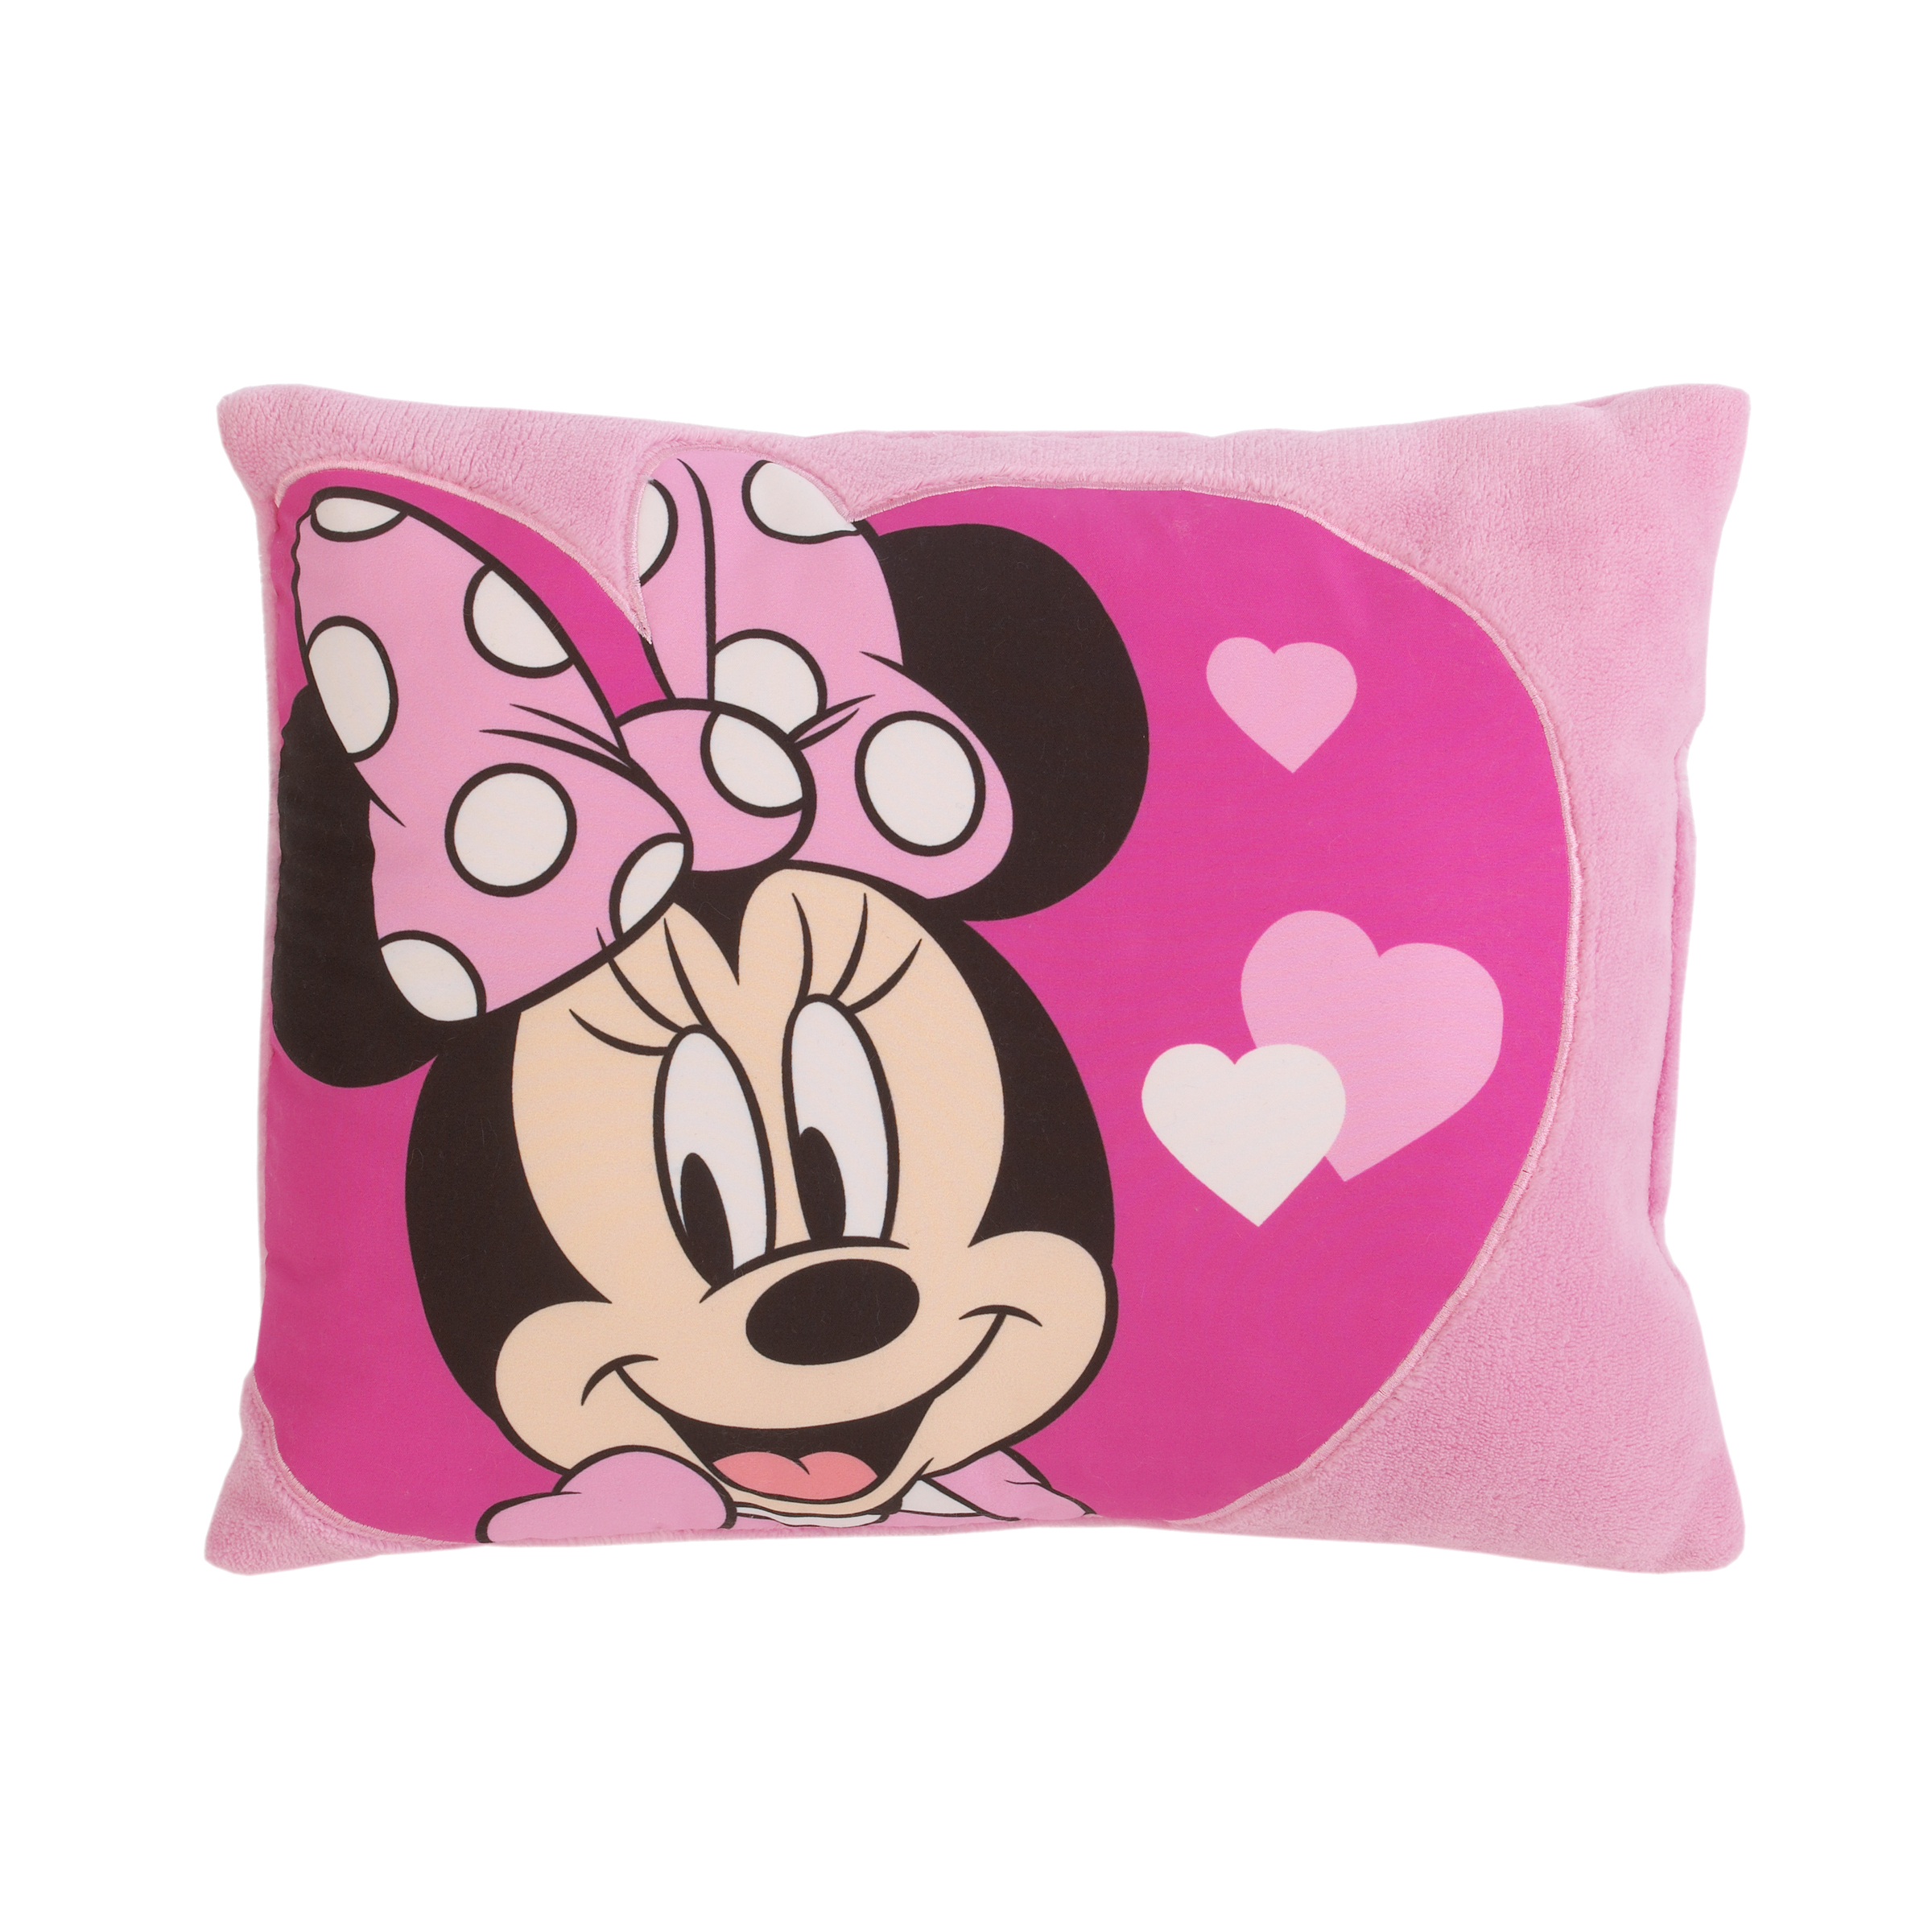 Minnie Mouse Personalized pillow